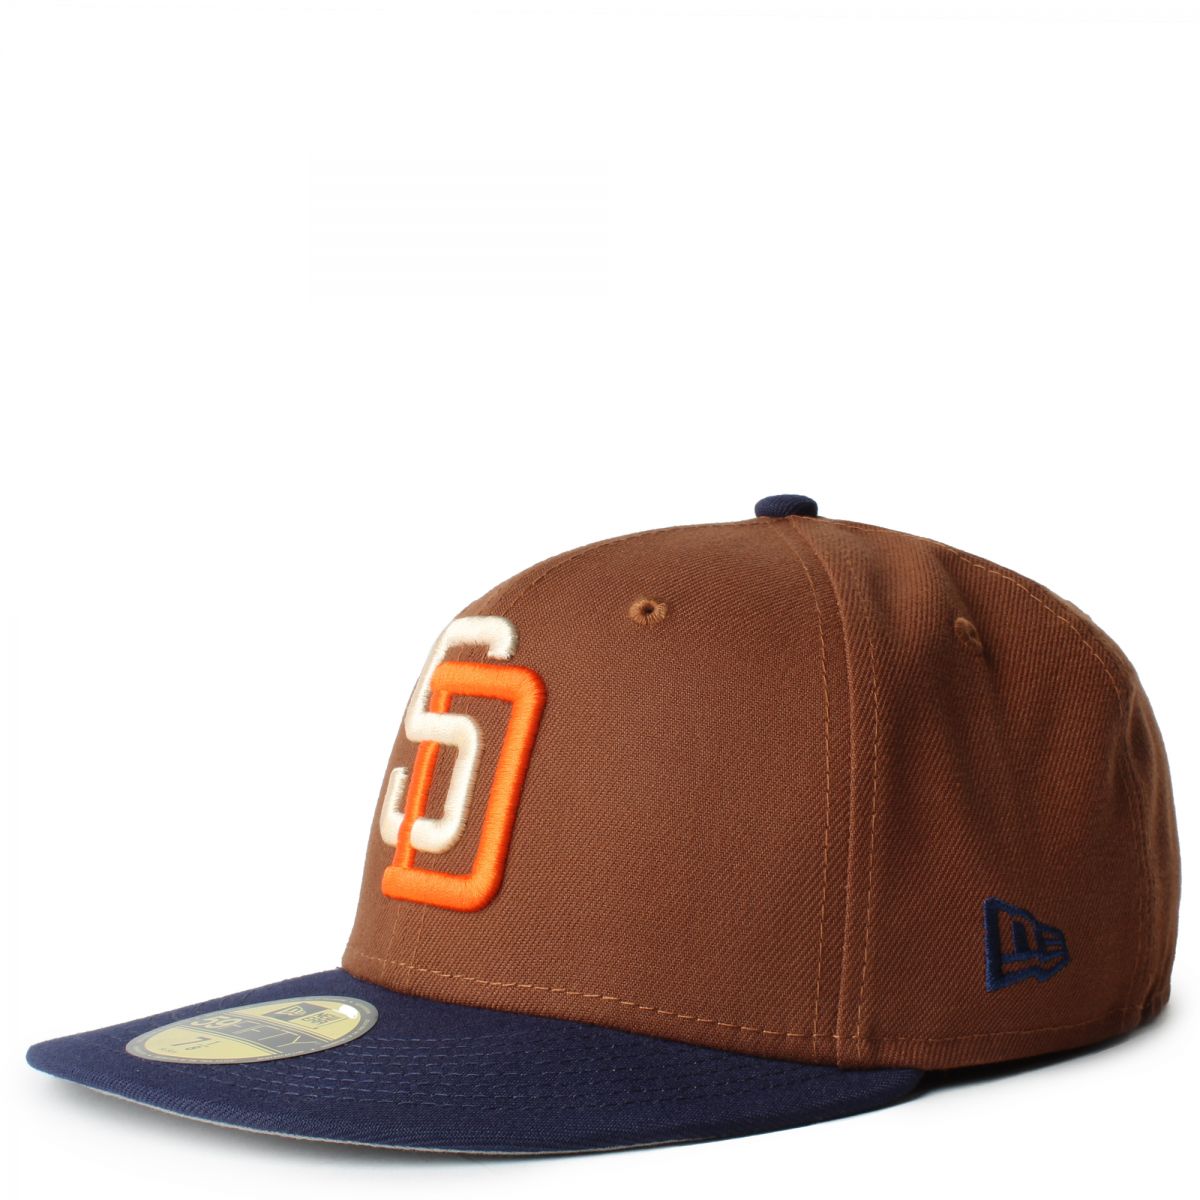 New Era 59Fifty LRG Collection Fitted Hat Cap Size 7 1/4 Brown and Orange